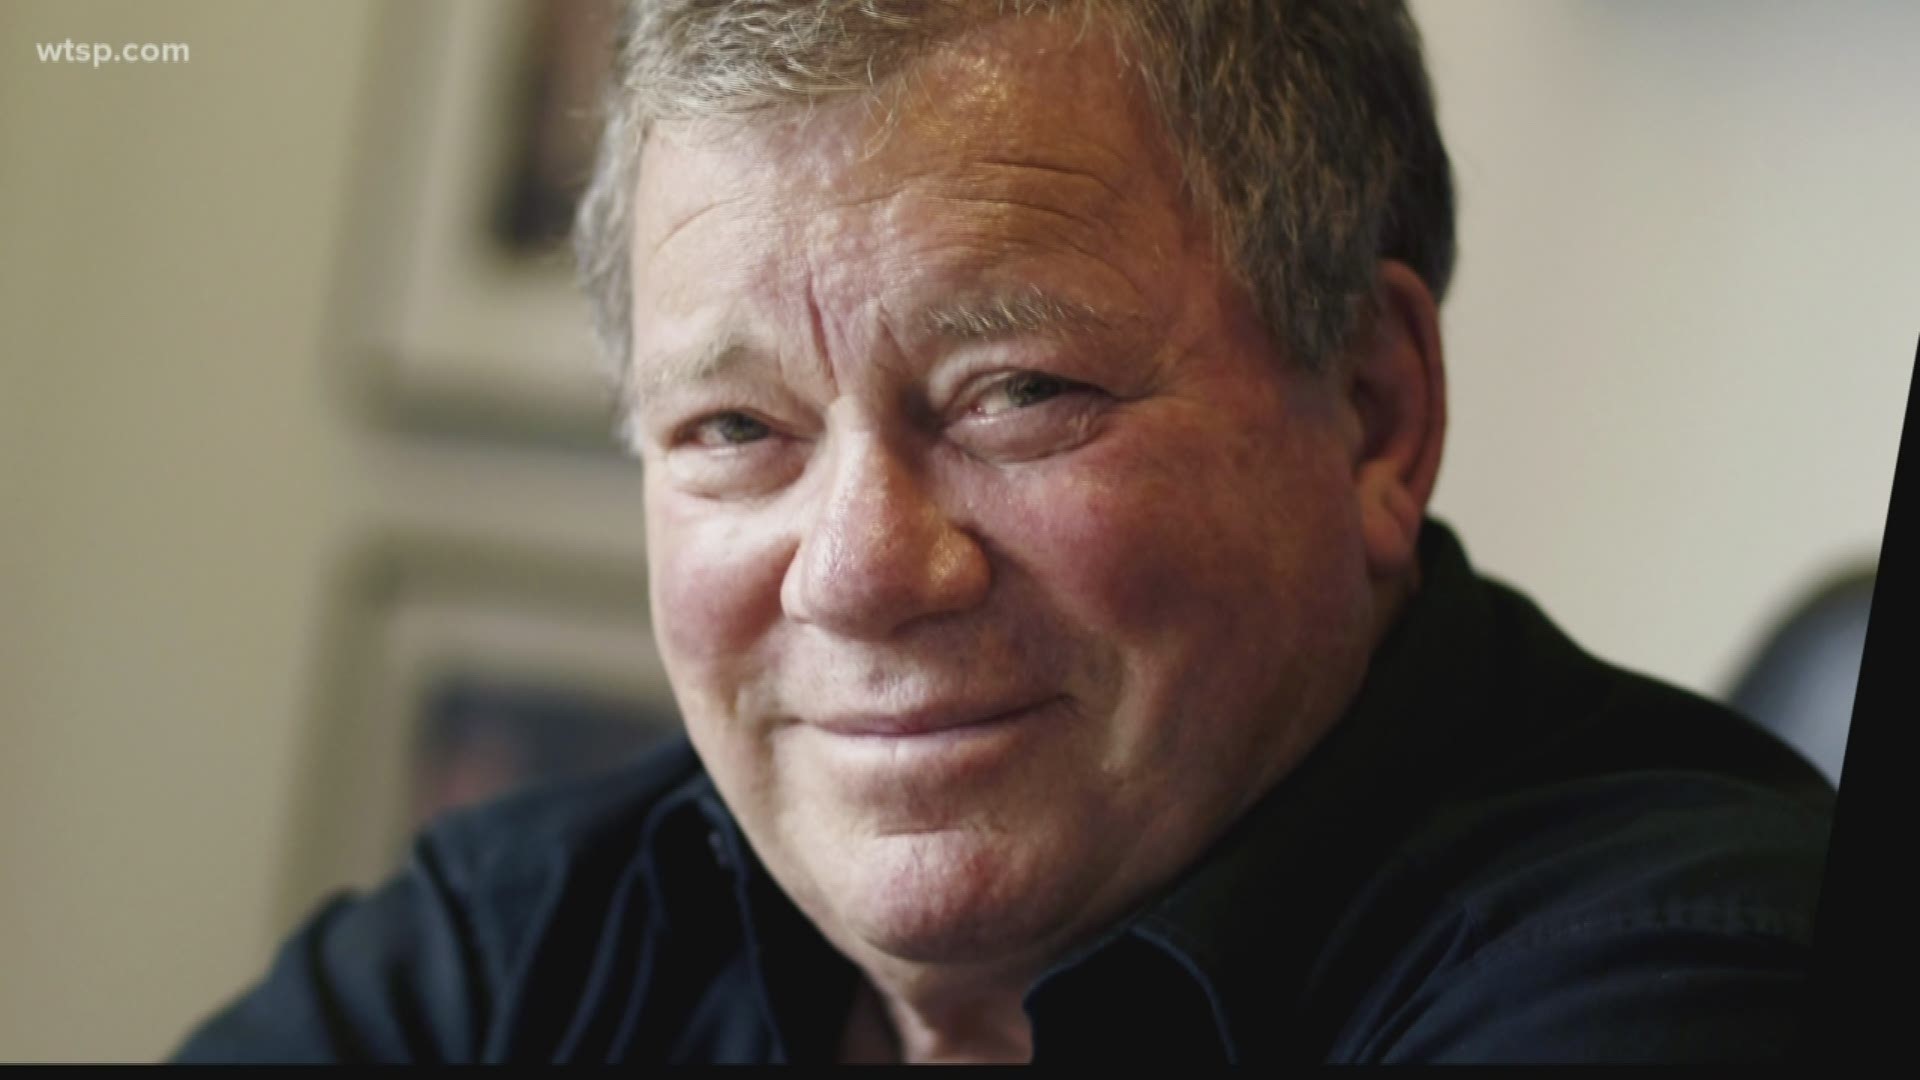 Canadian actor William Shatner was born on March 22, 1931